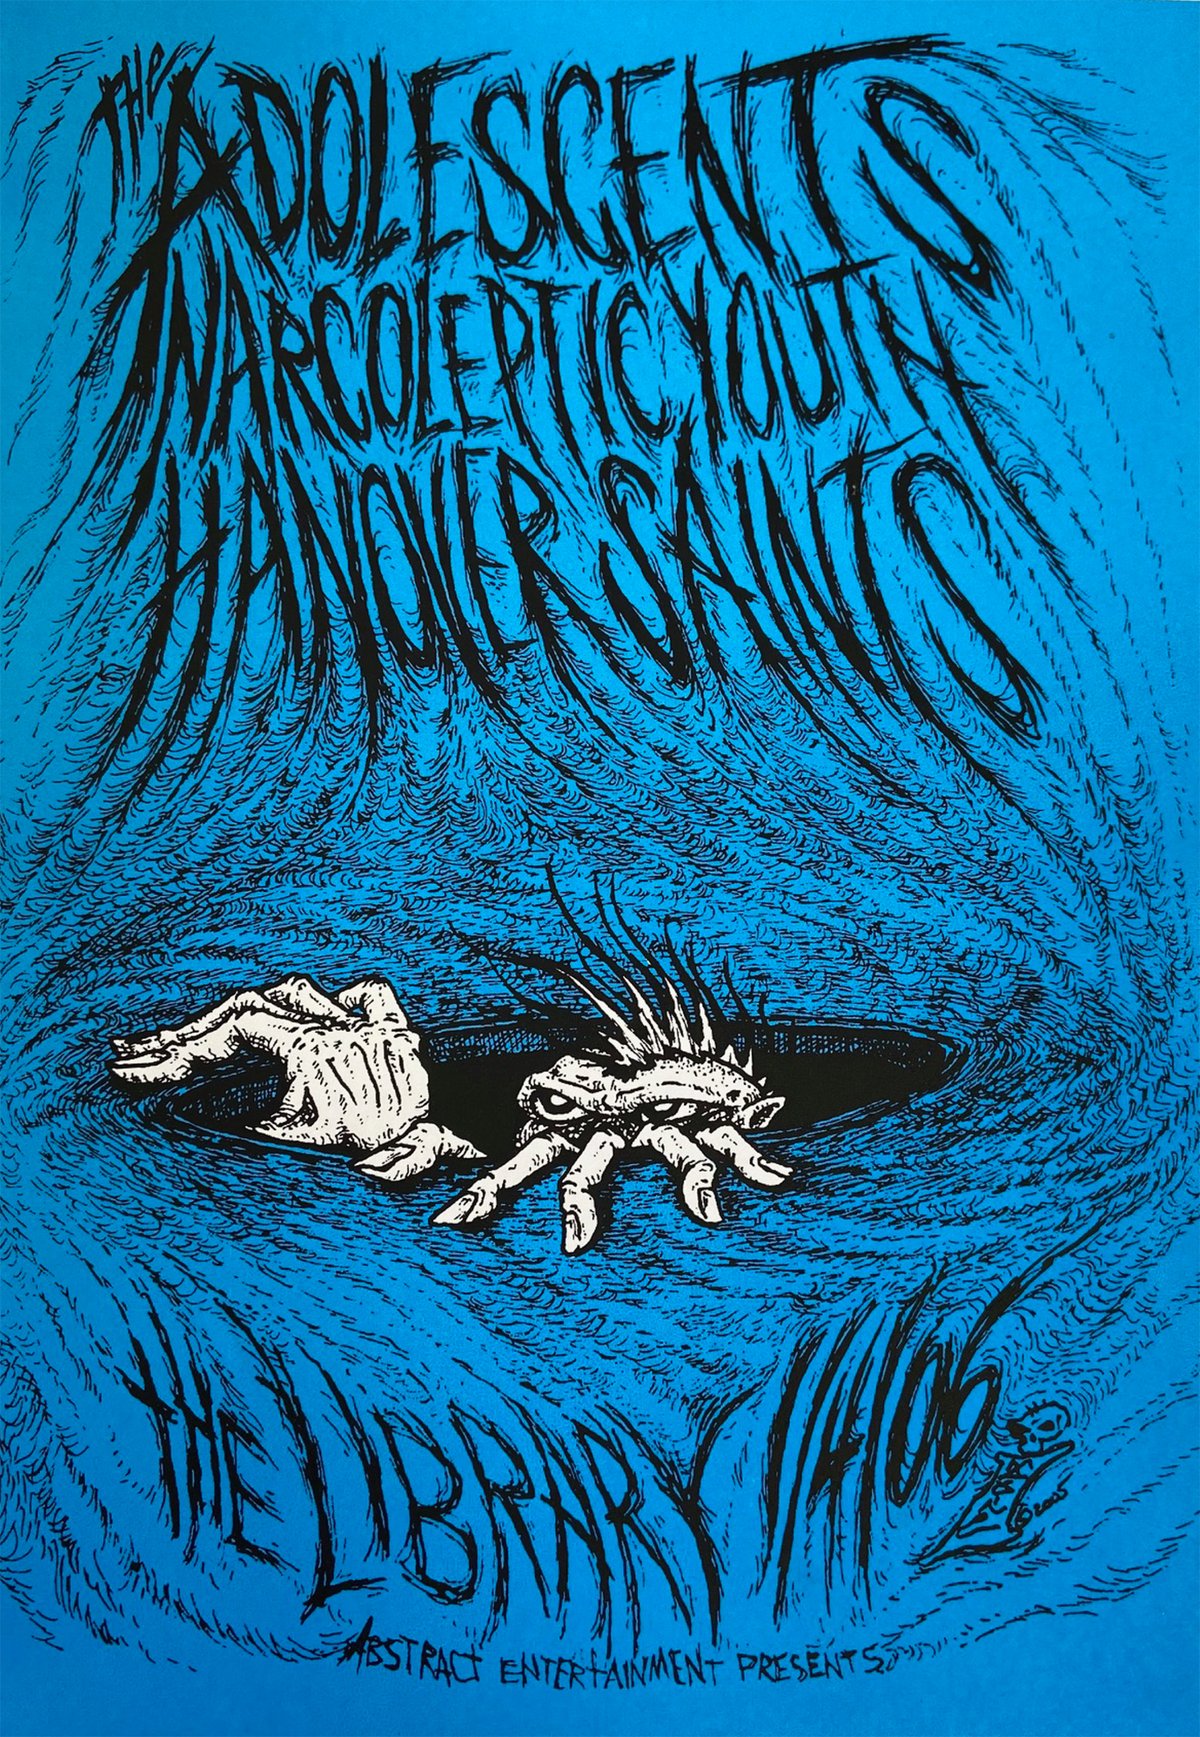 Image of Adolescents, Narcoleptic Youth, Hanover Saints 2006 Poster